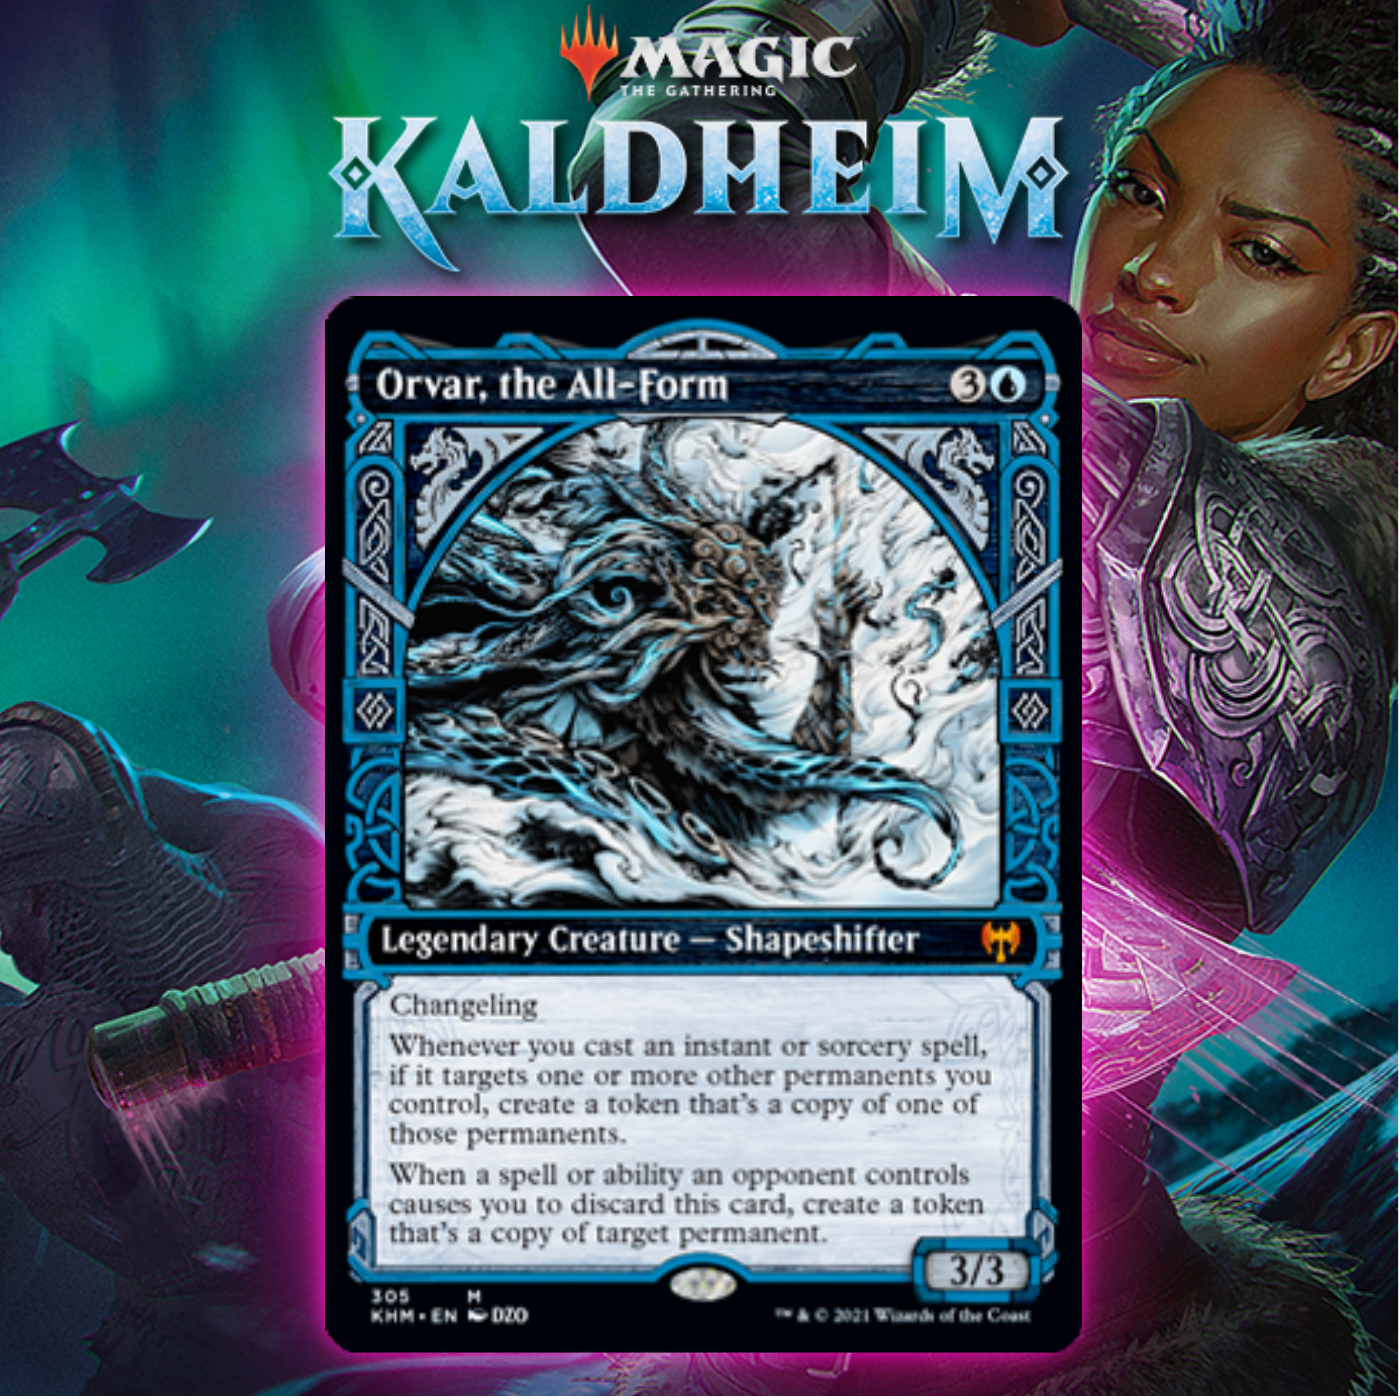 Blue Gets Mythic Rare Shapeshifter In Orvar The All Form In Kaldheim 